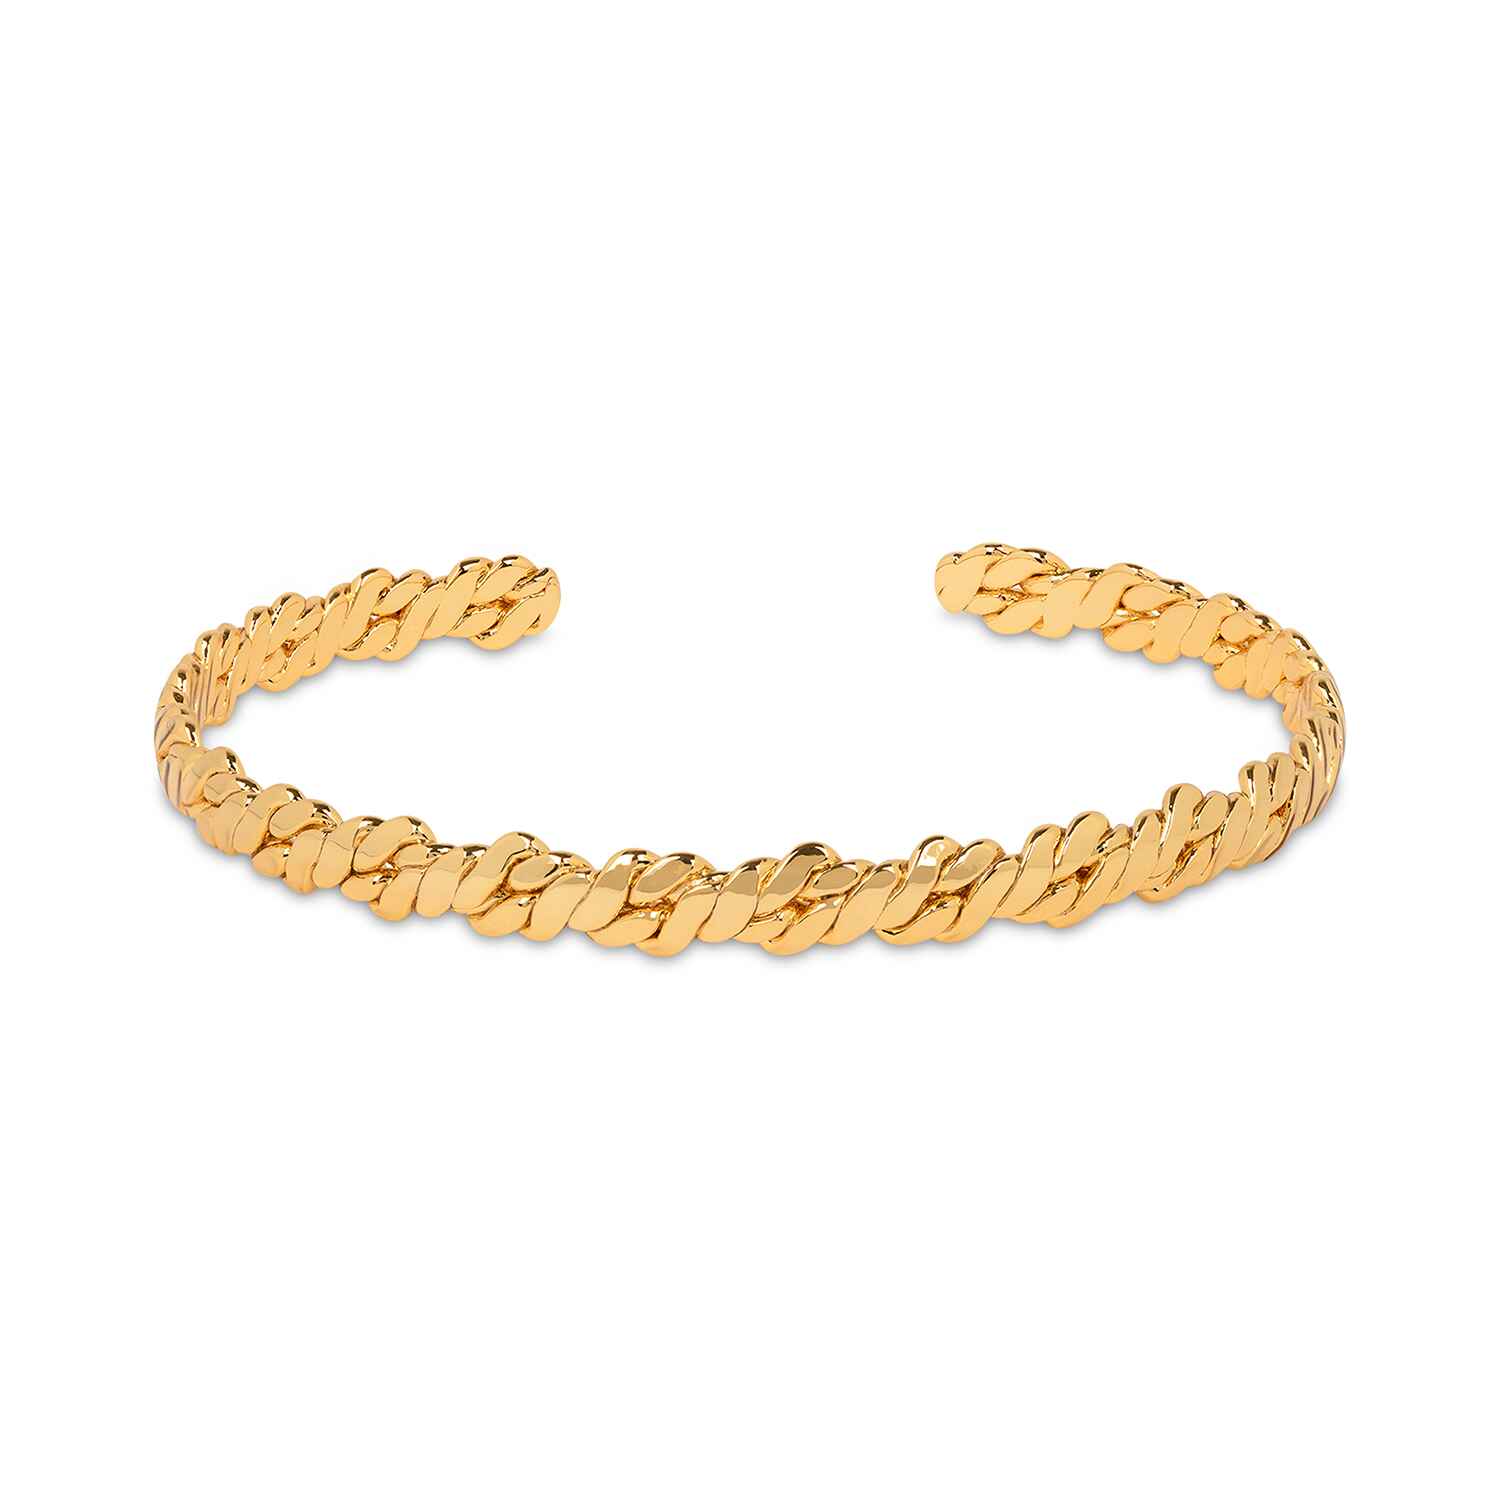 Delicately handmade to fit any wrist size, the Otto Twisted Gold bangle is designed to relfect the texture of a twisted rope. This sustainable open cuff looks great worn alone or stacked.